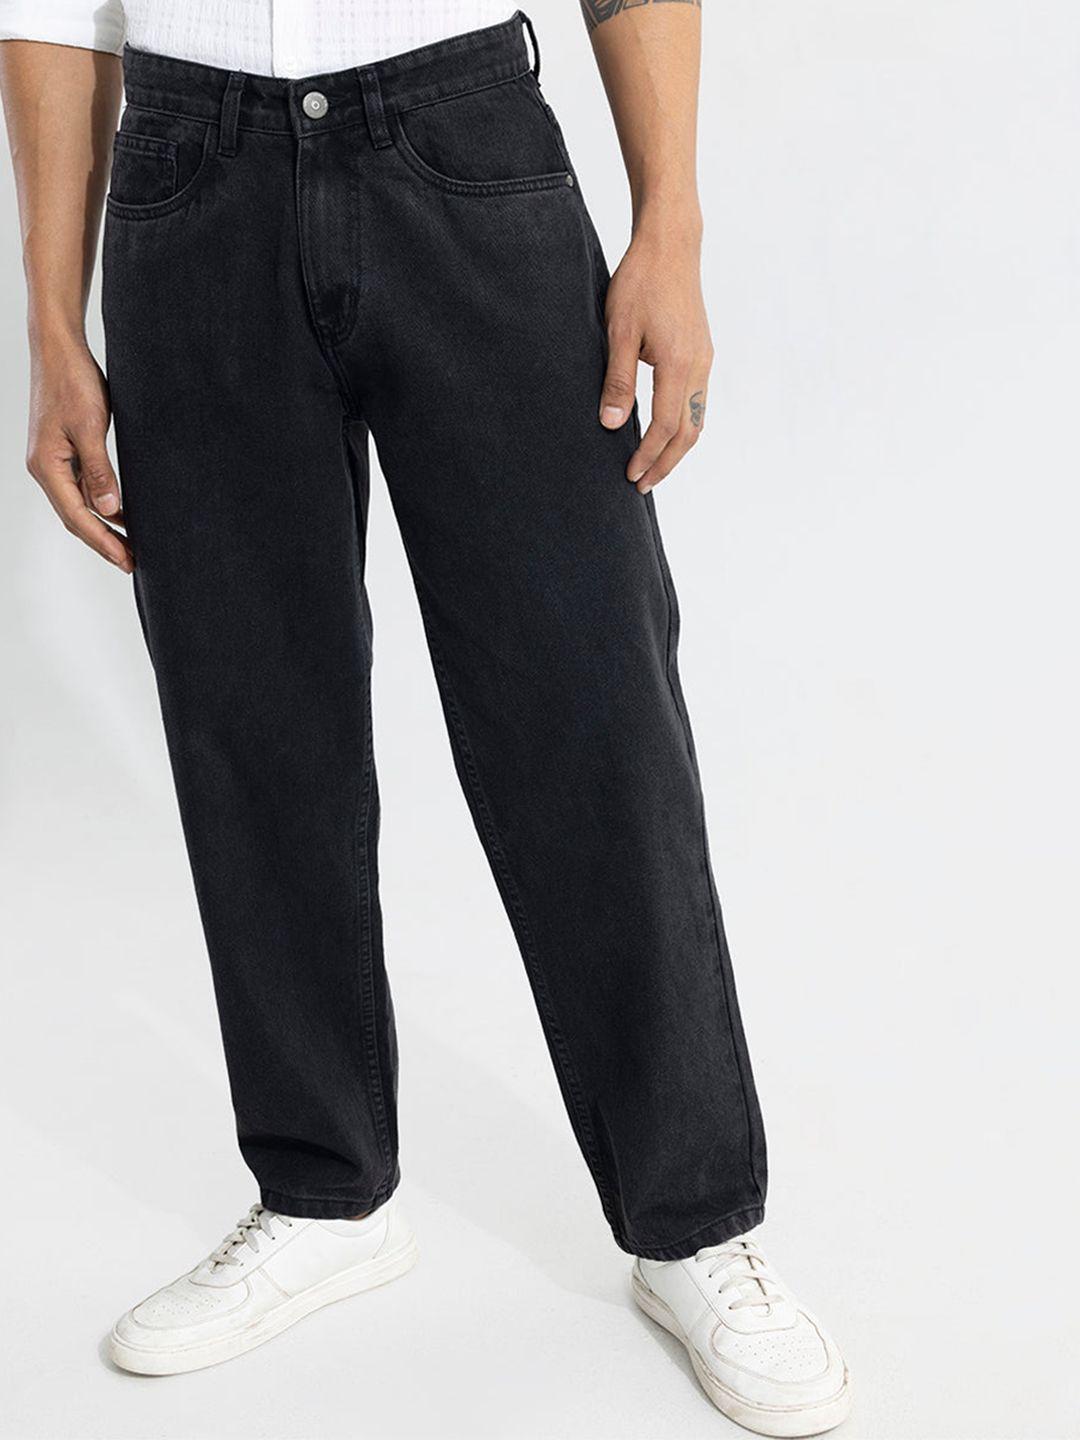 snitch-men-straight-fit-clean-look-stretchable-jeans